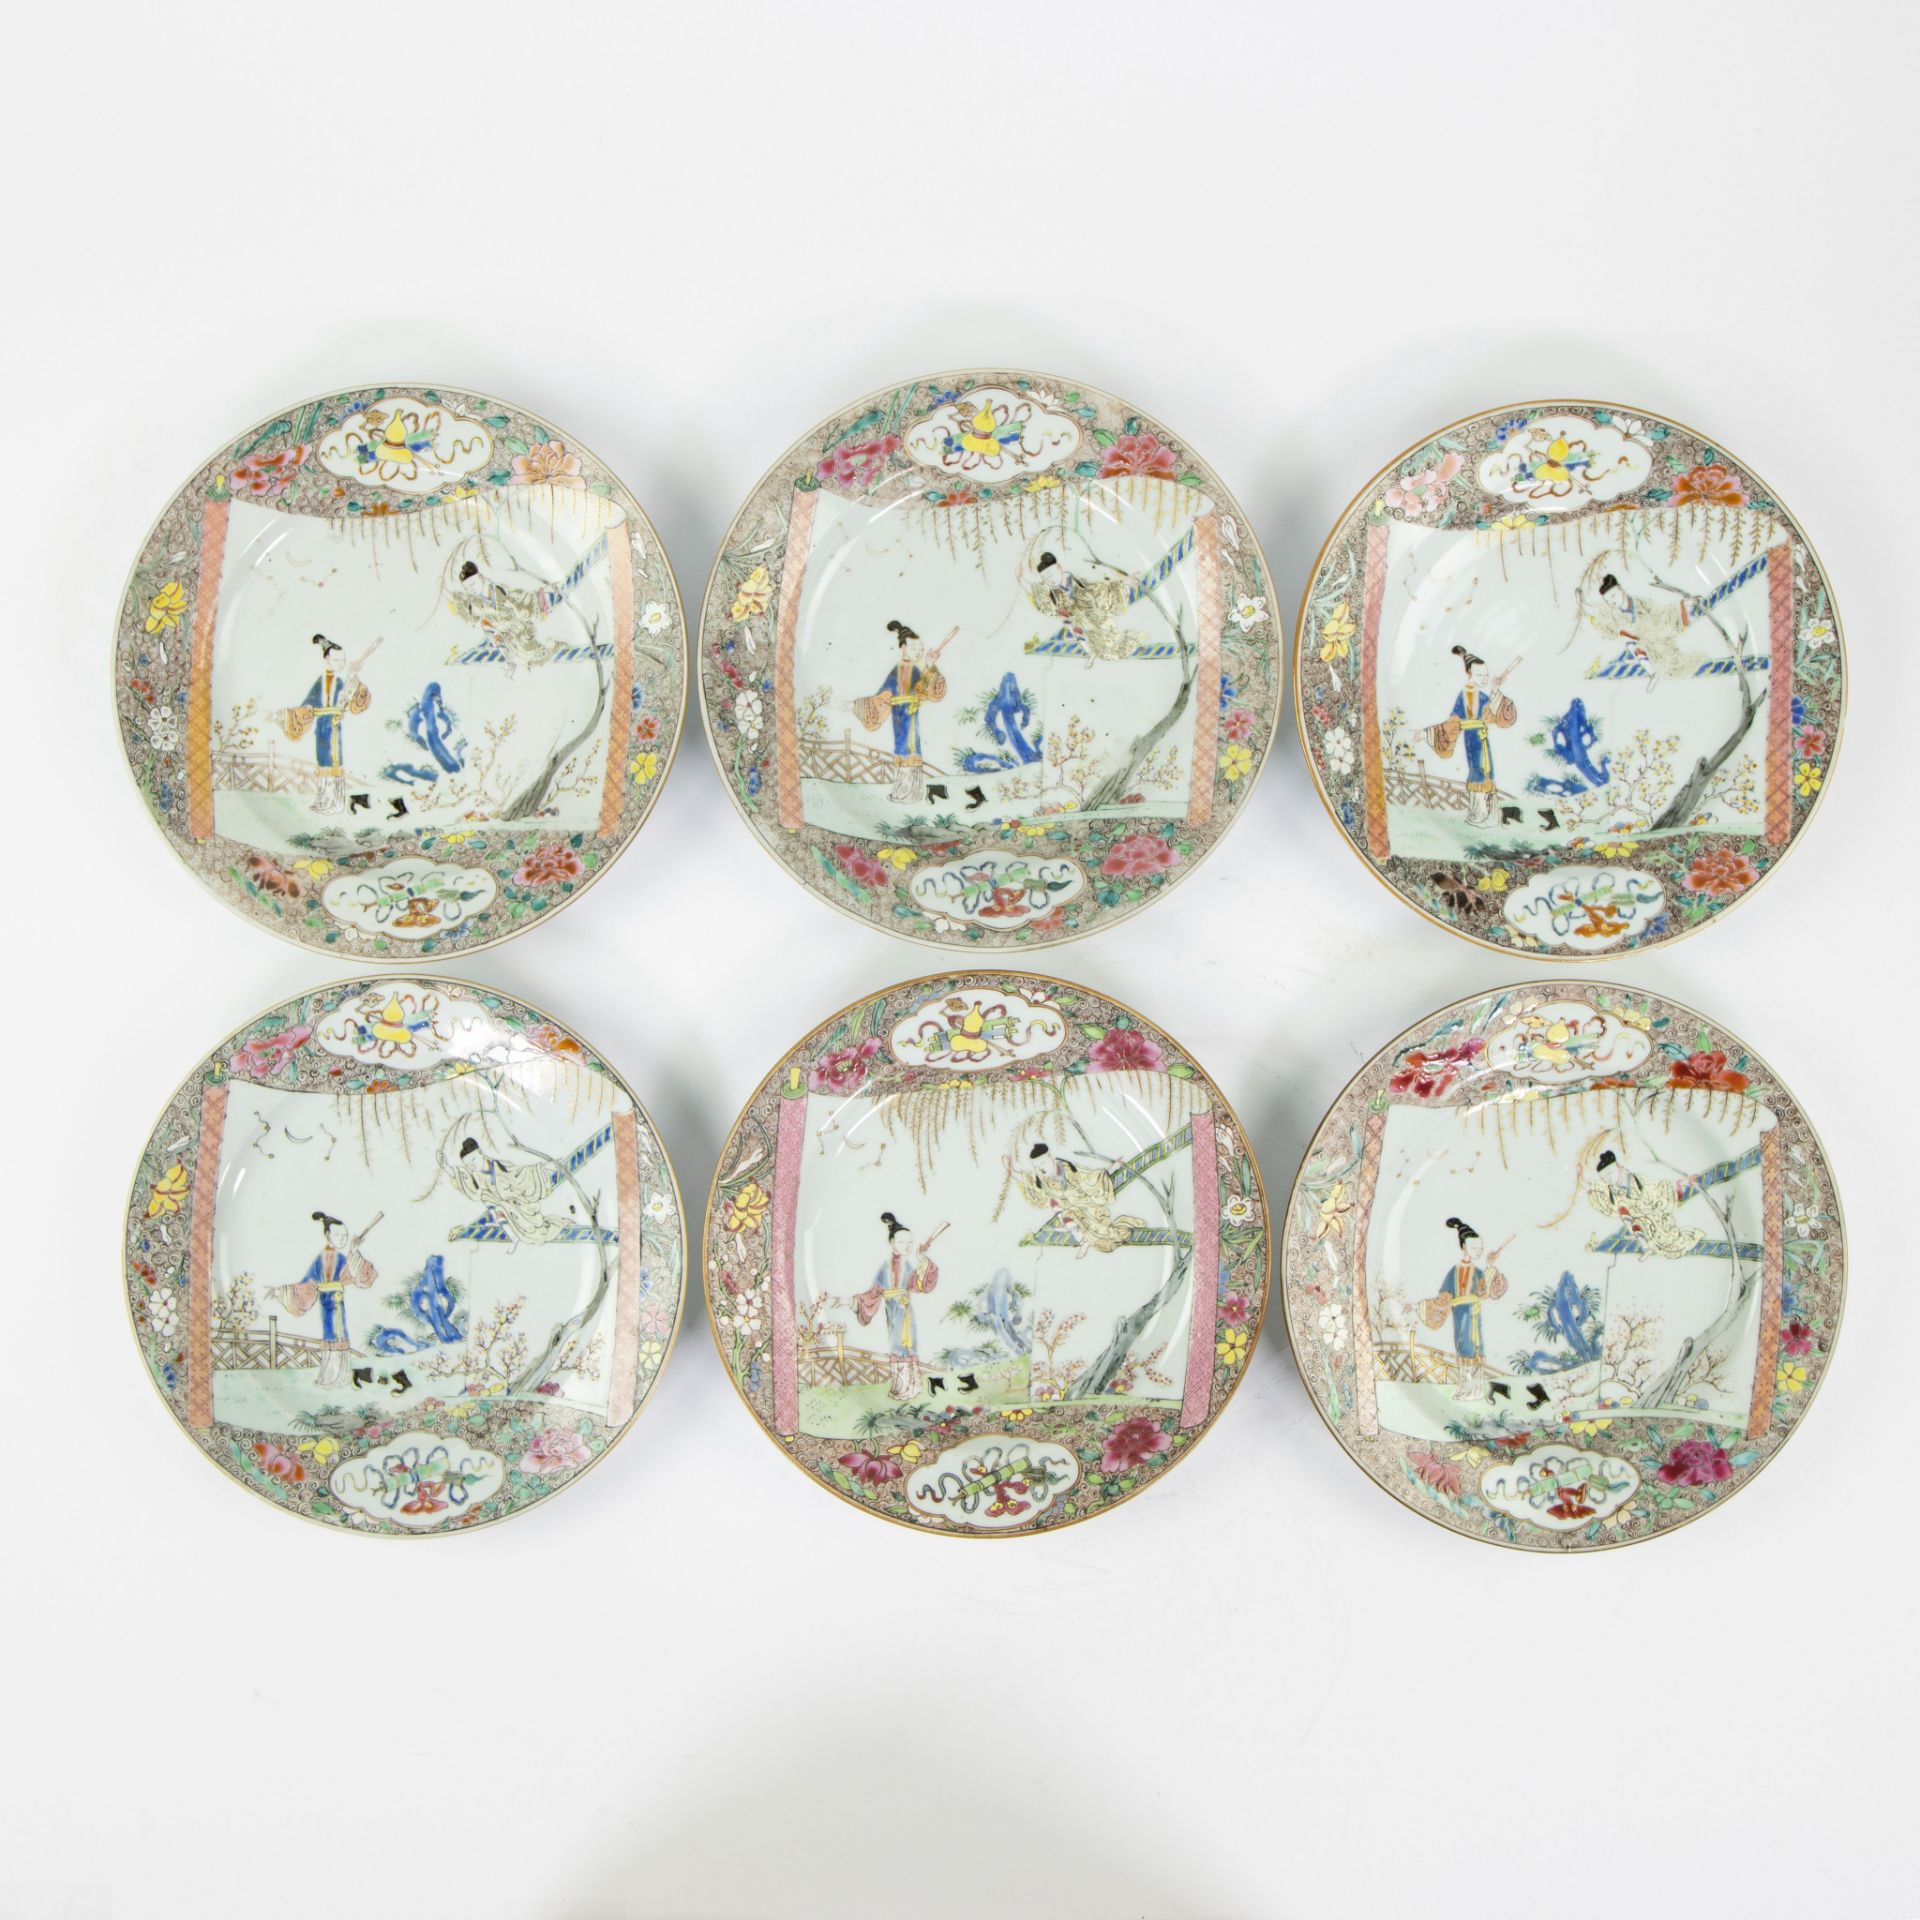 Set of six Chinese porcelain plates depicting a scene from the romance of The Western Chamber. Zhang